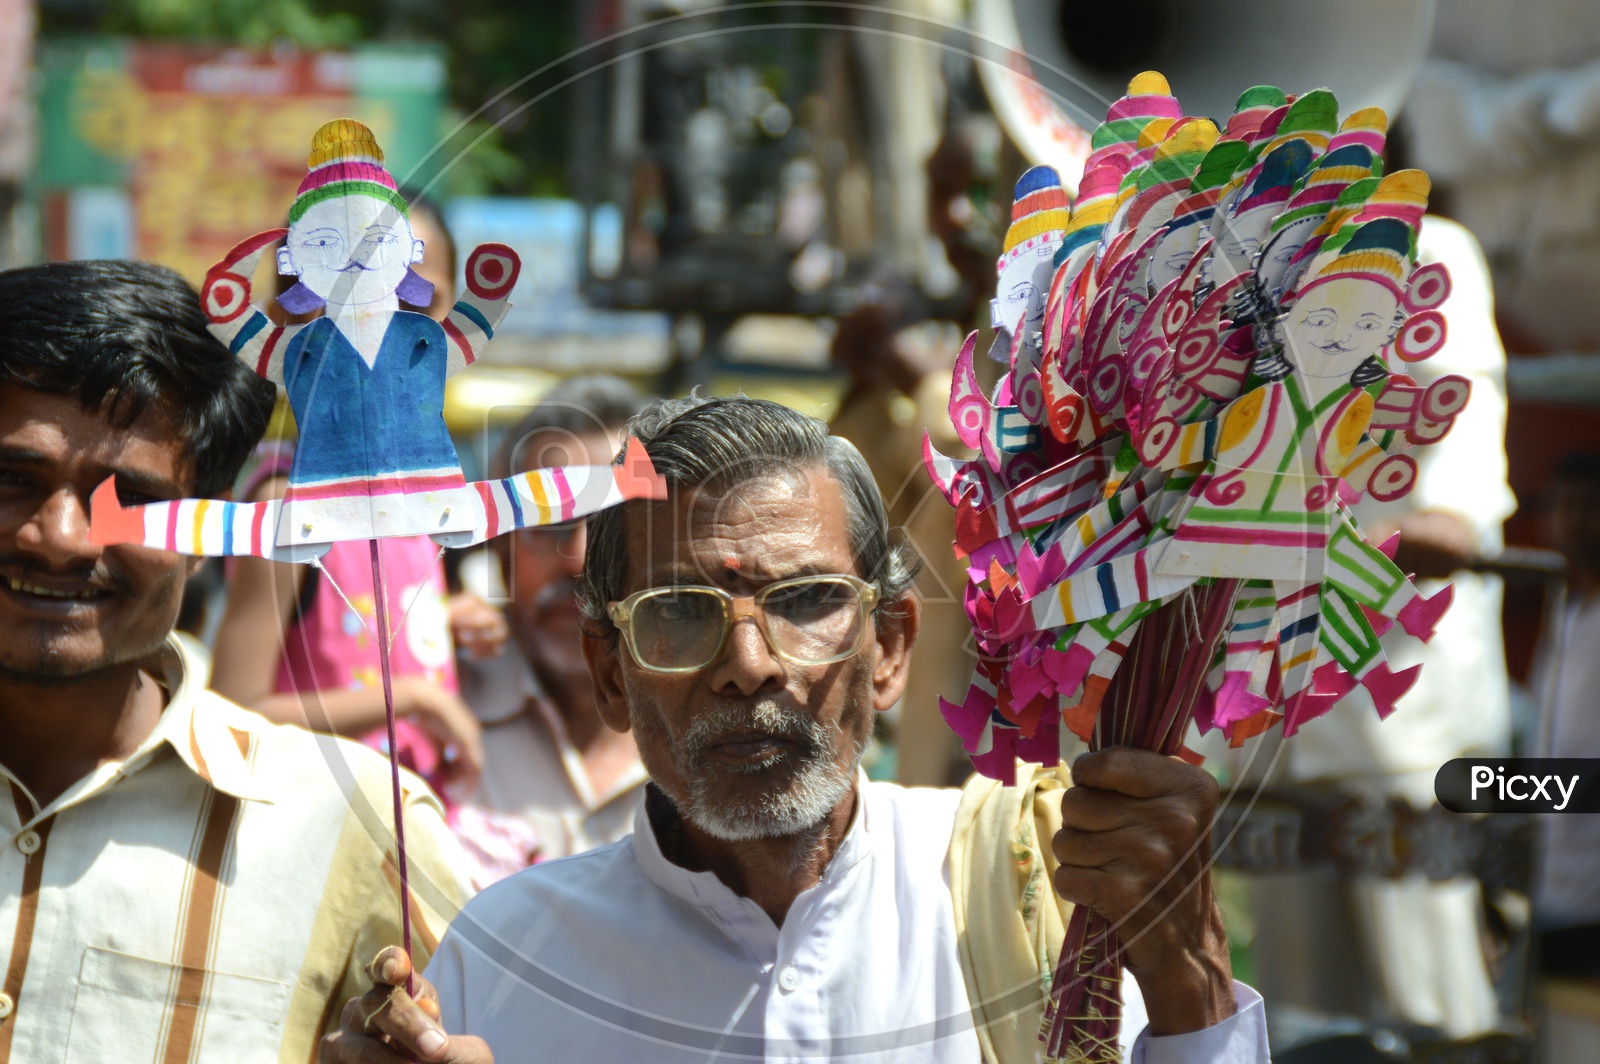 A Vendor Selling Dolls On the Streets Of Nagpur At Marbat Procession